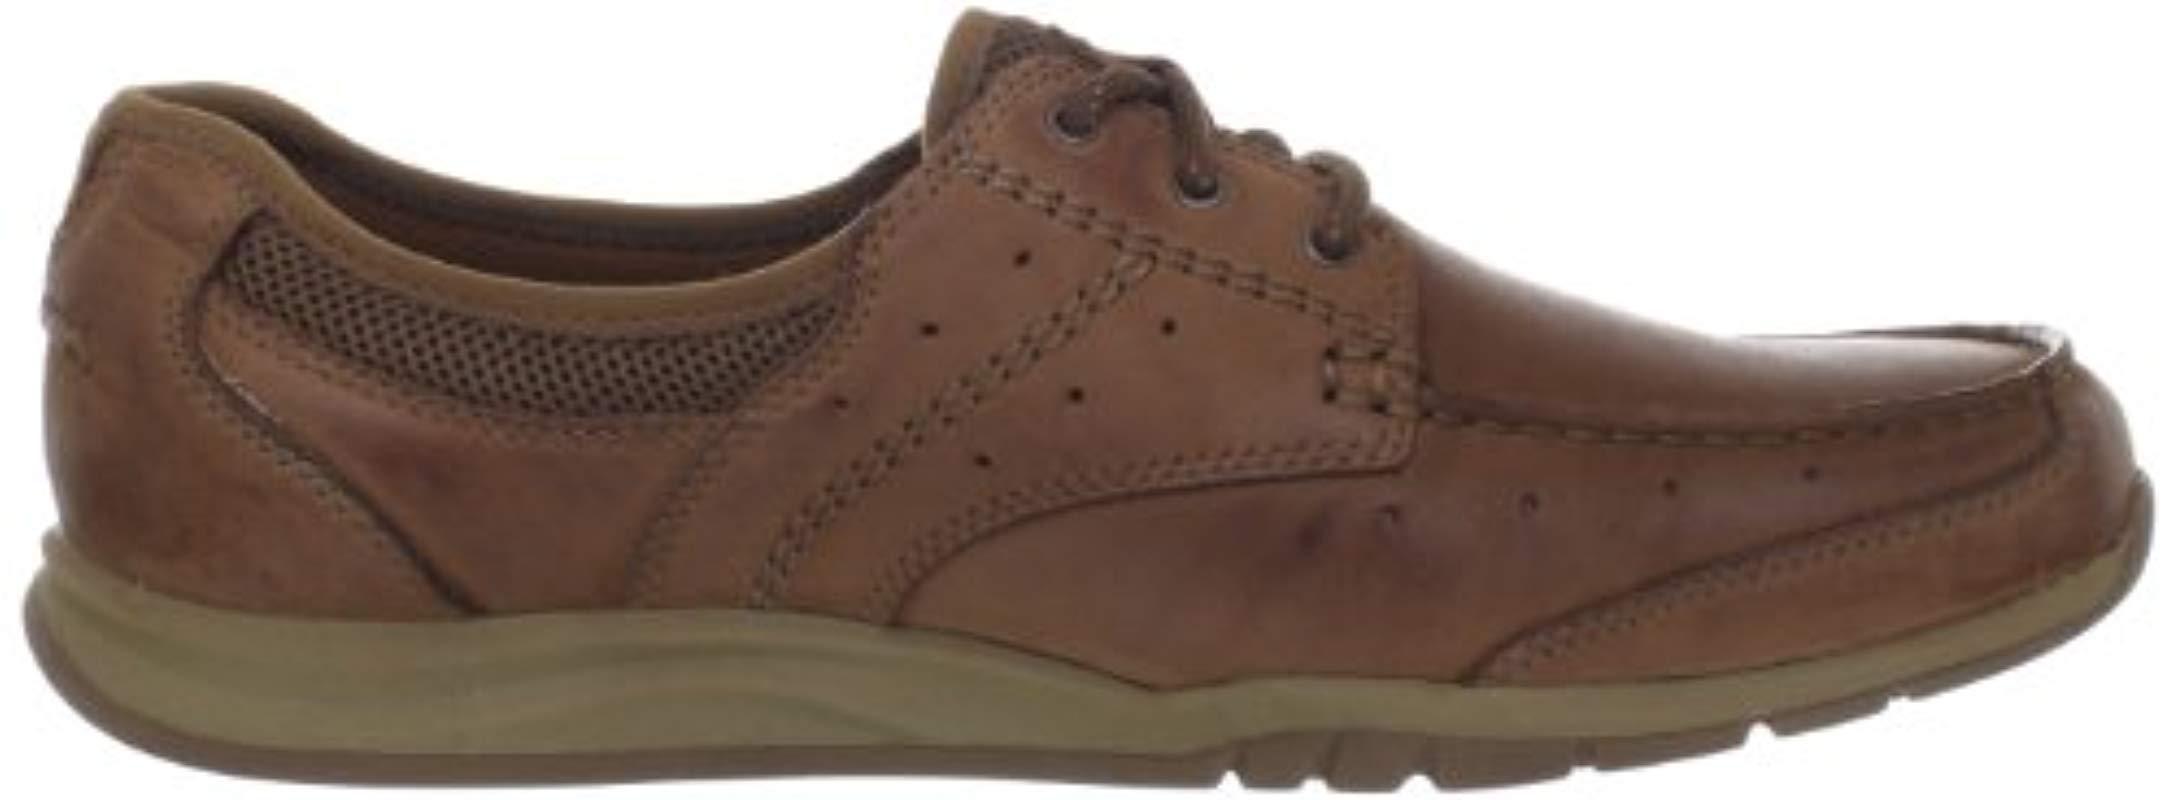 Clarks Armada English Oxford in Tan Leather (Brown) for Men - Lyst